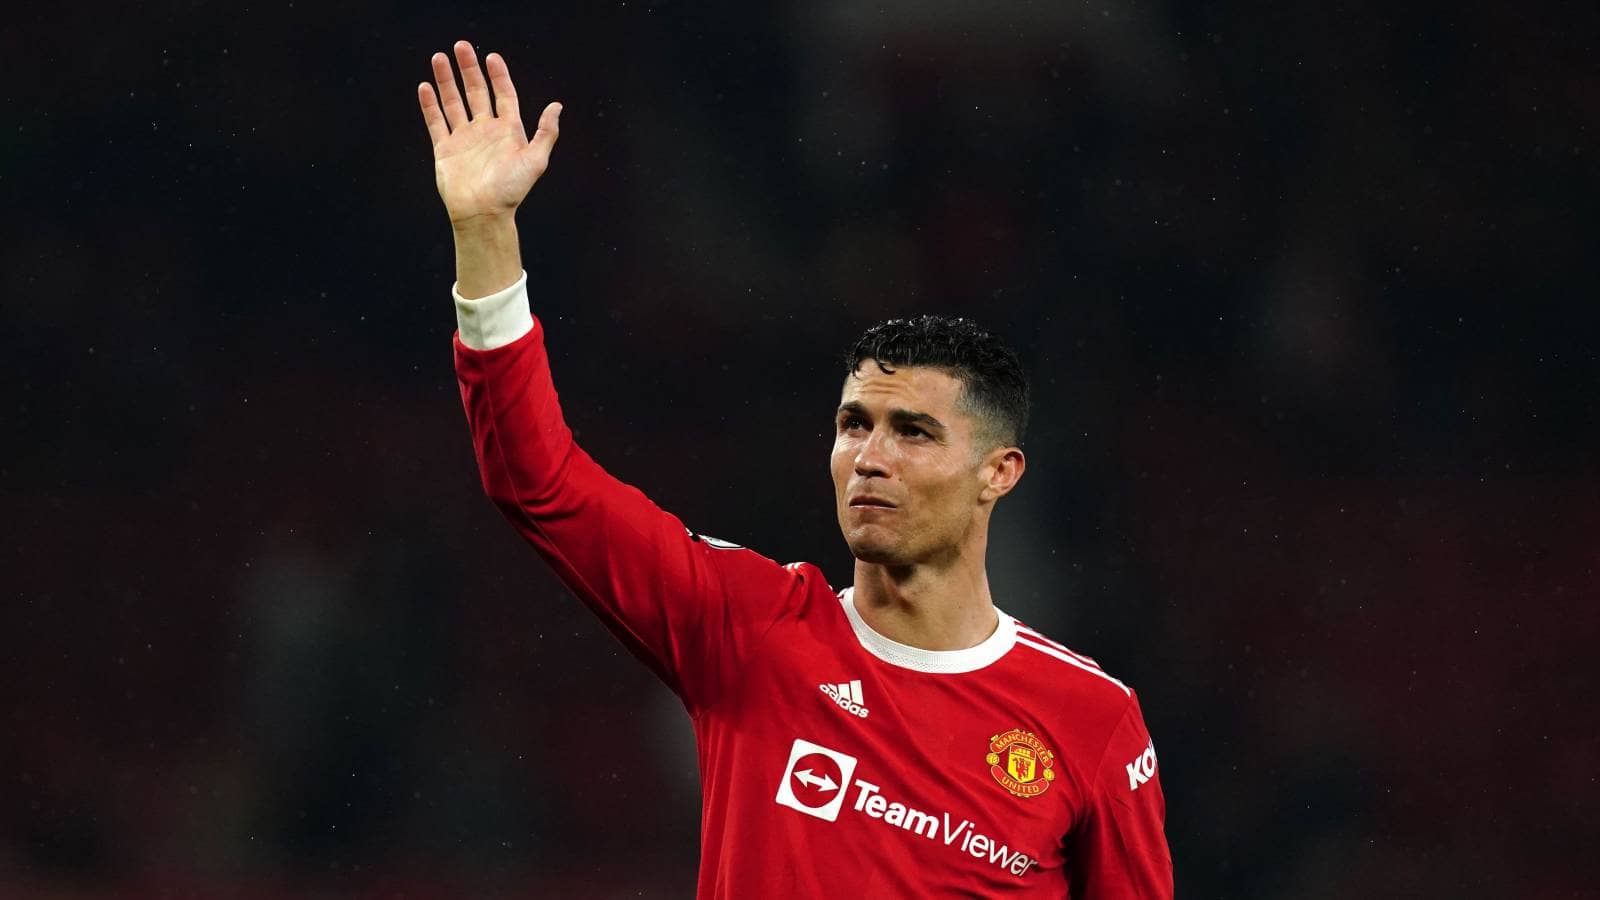 Cristiano-Ronaldo-waving-to-the-Old-Trafford-crowd-after-a-Manchester-United-win.jpg